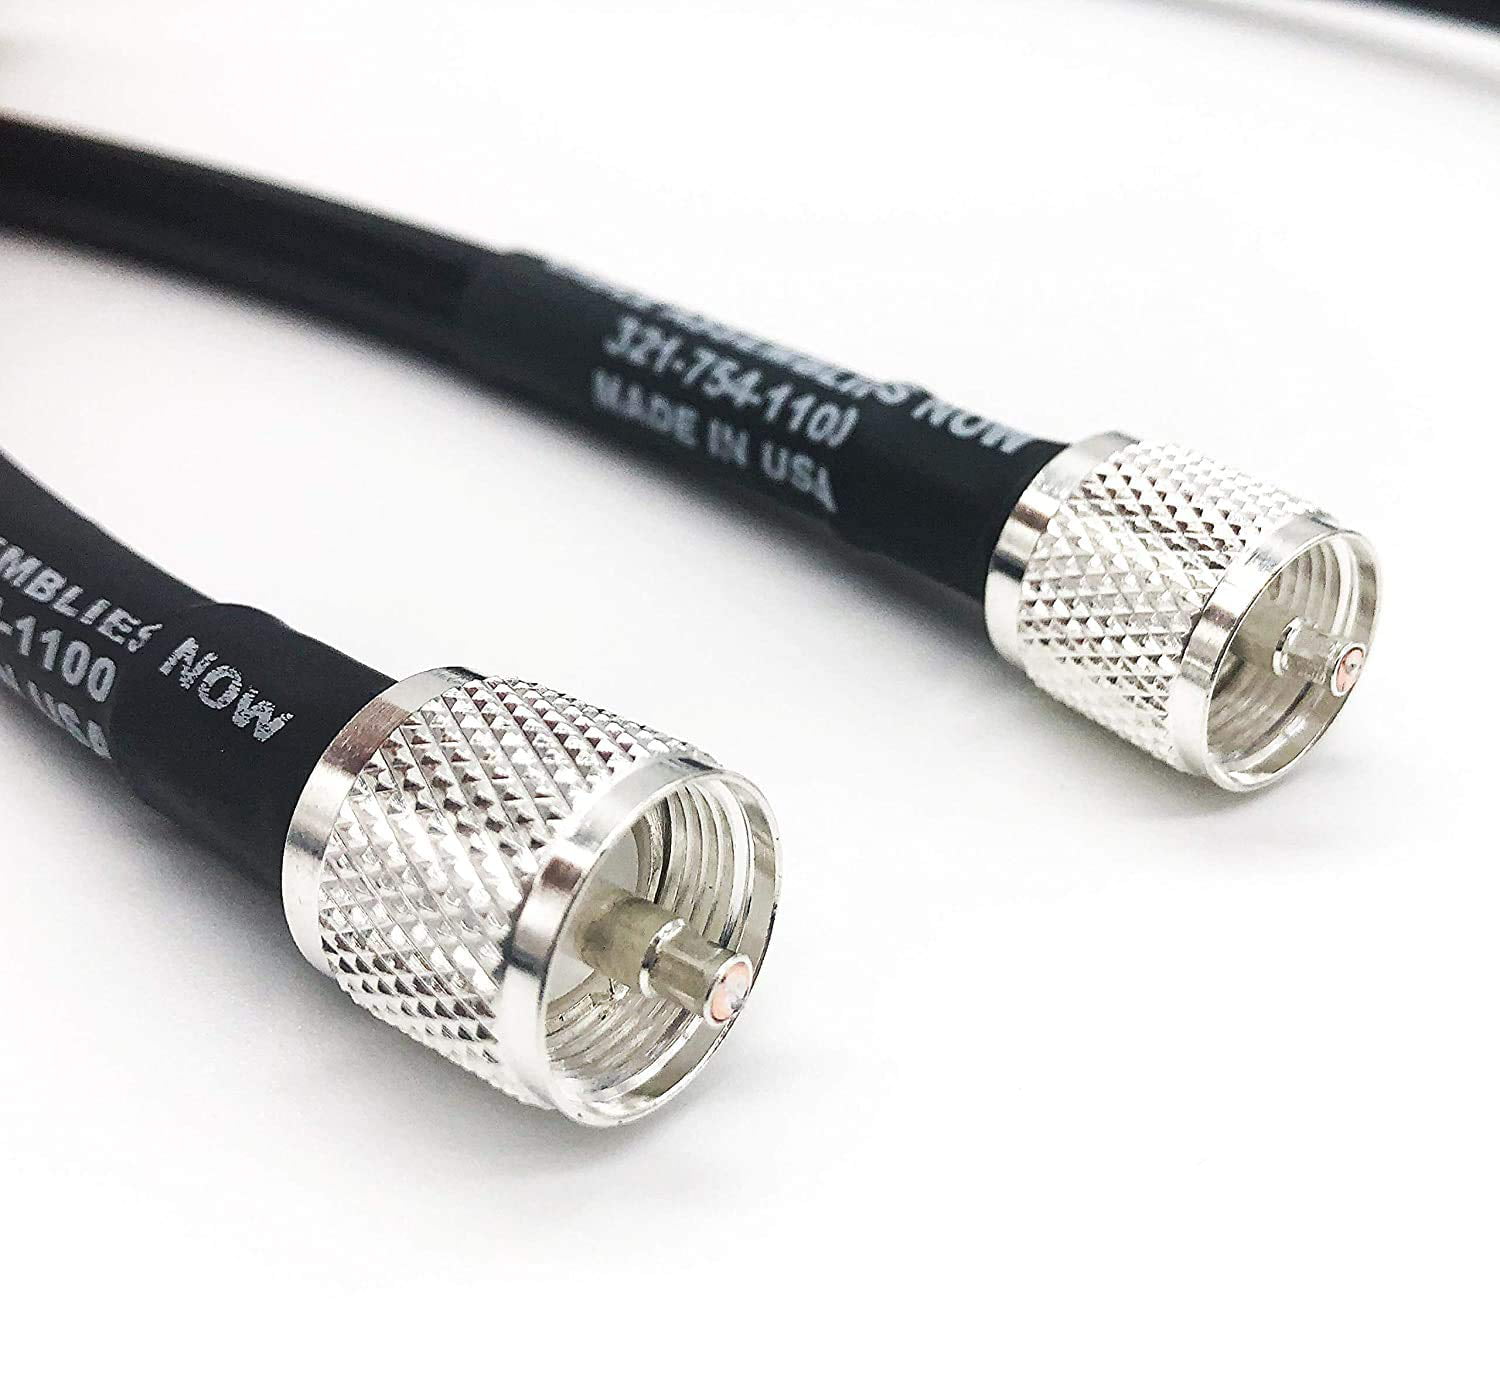 TIMES® 30 Feet ULTRA LOW LOSS LMR400 N Male to N Female Clamp RF COAX Cable USA 